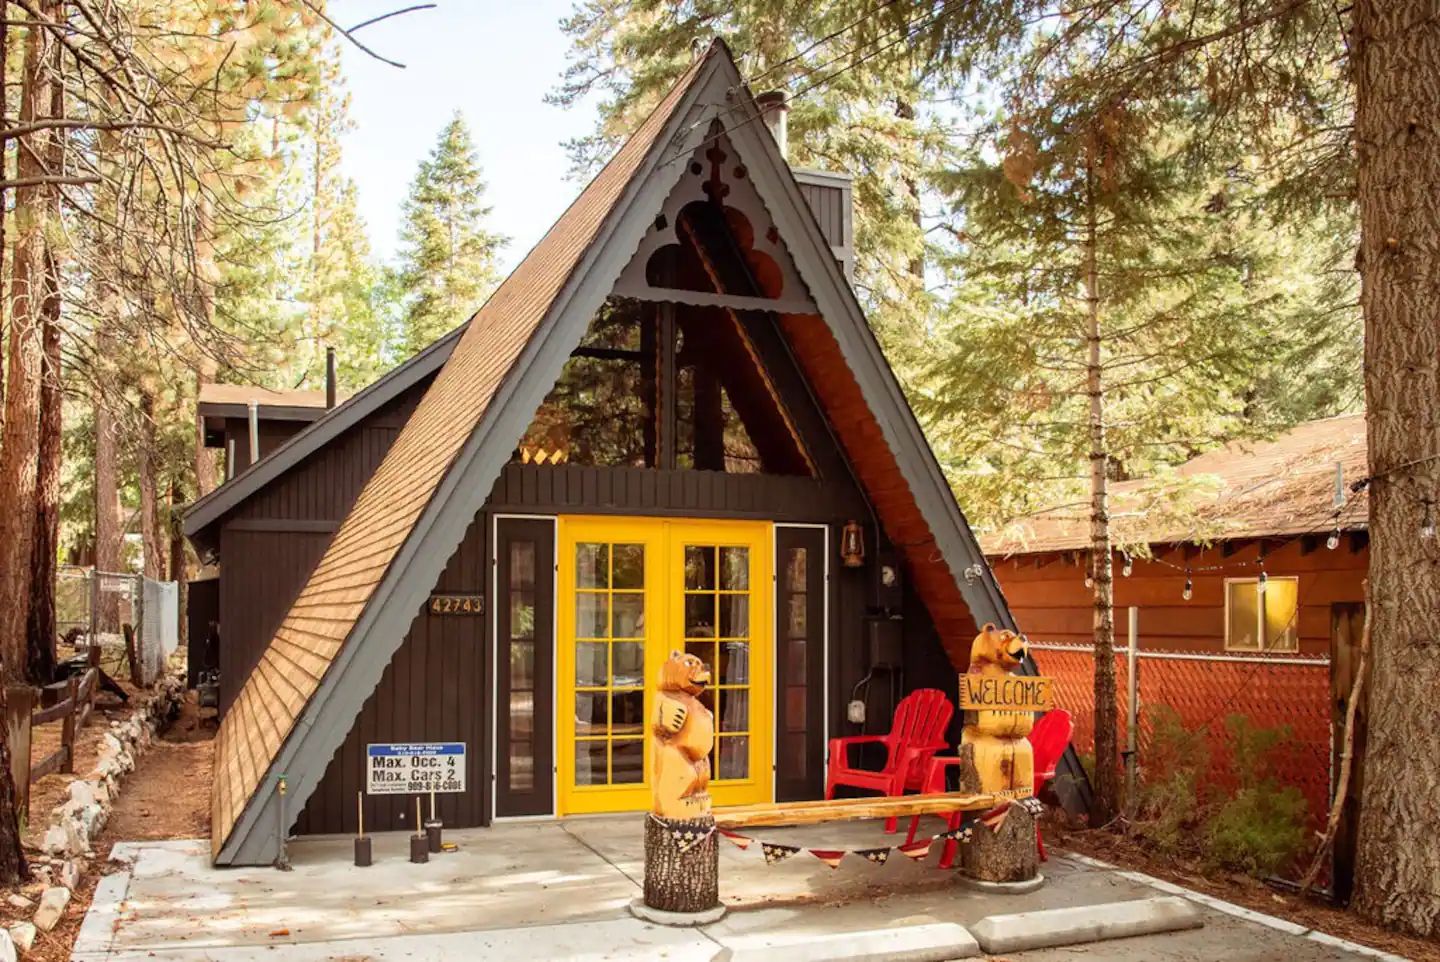 Two wooden carved bears welcome guests to an A-frame cabin in the woods with bright yellow doors.